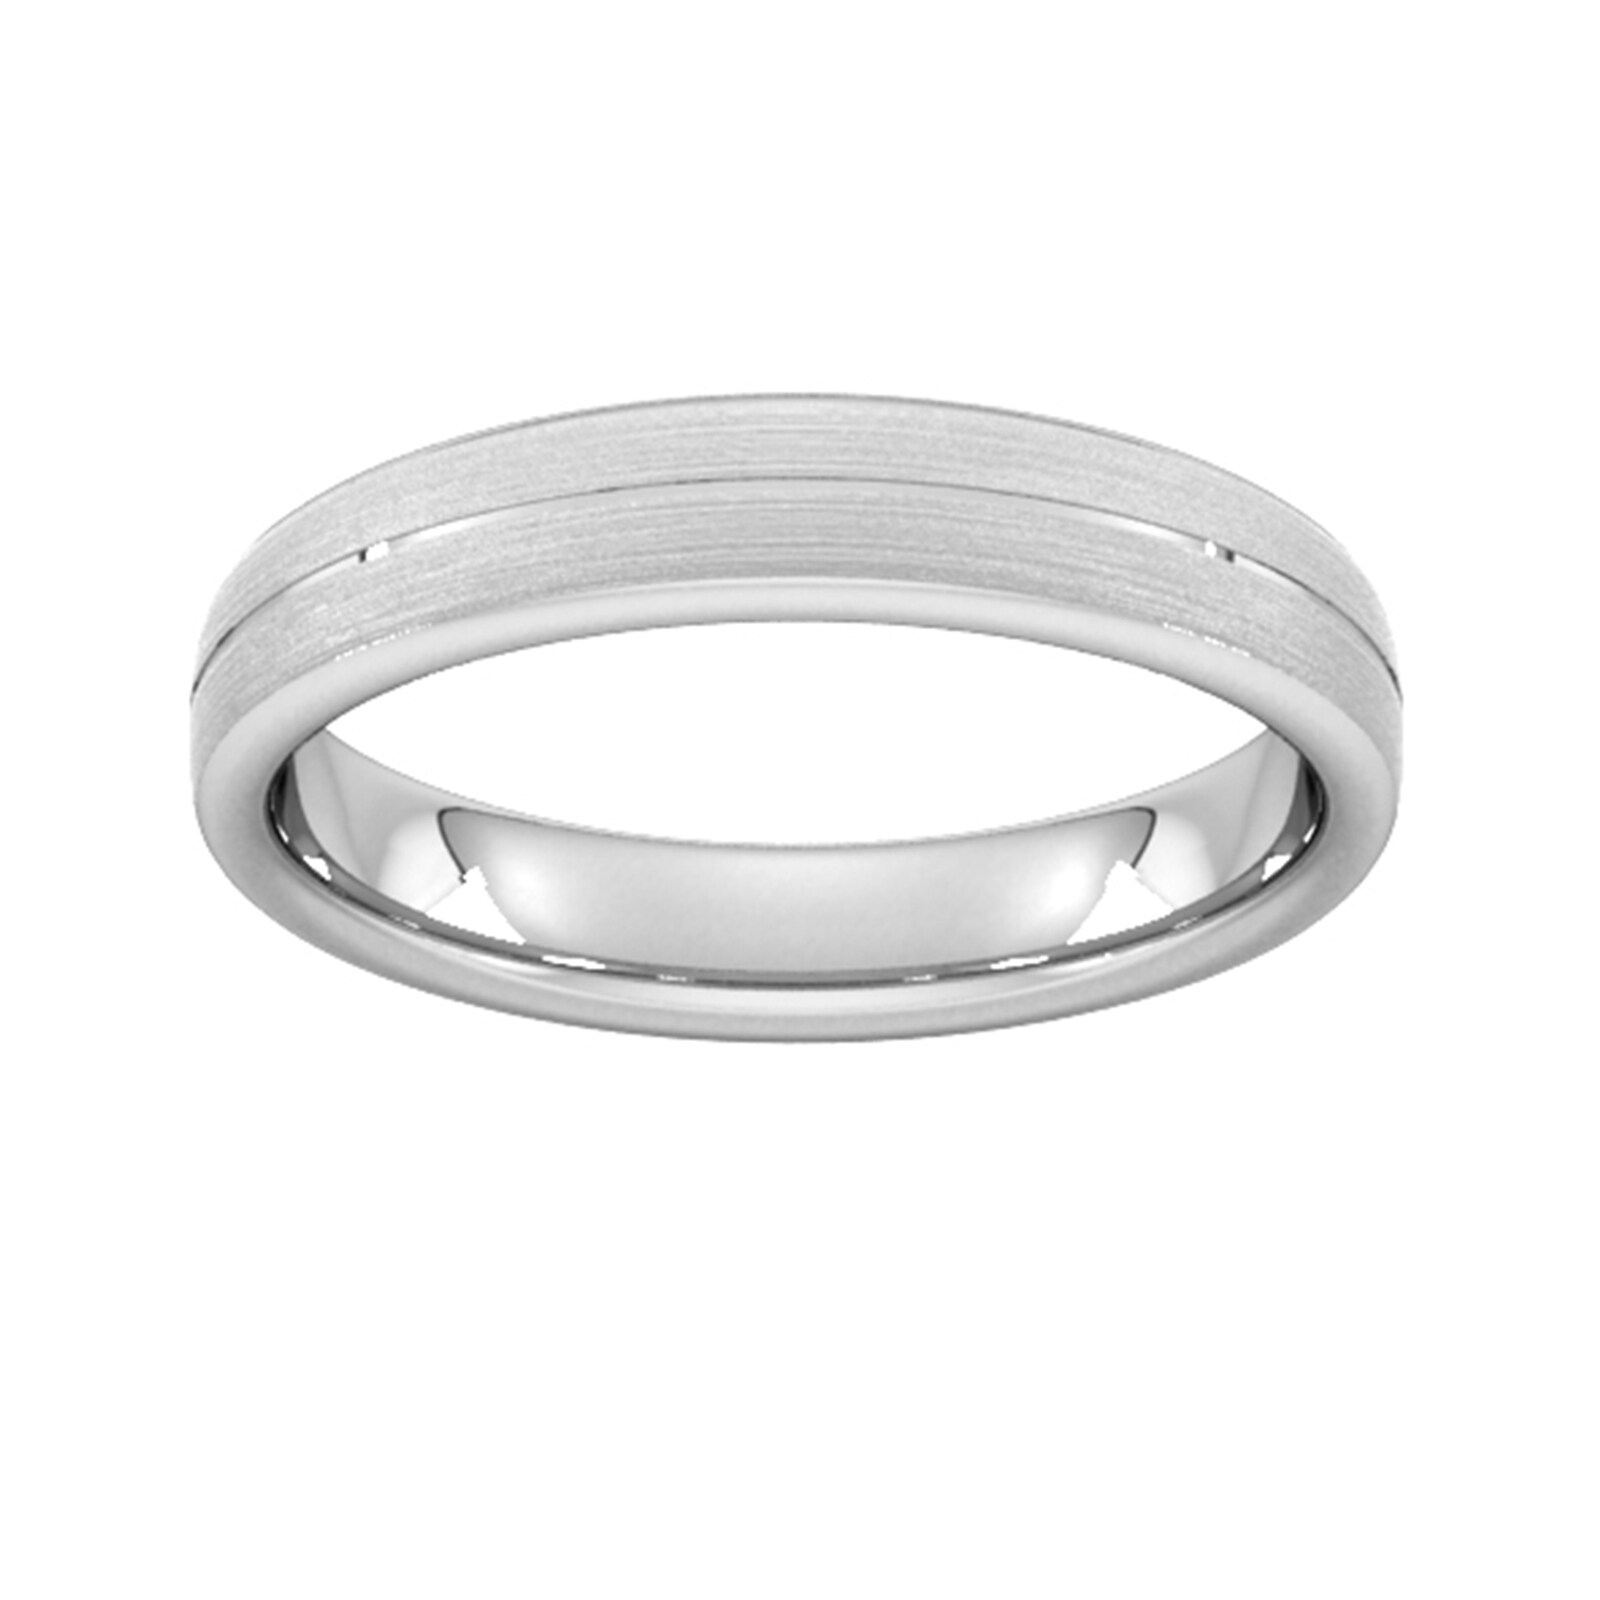 4mm Slight Court Heavy Centre Groove With Chamfered Edge Wedding Ring In 18 Carat White Gold - Ring Size K